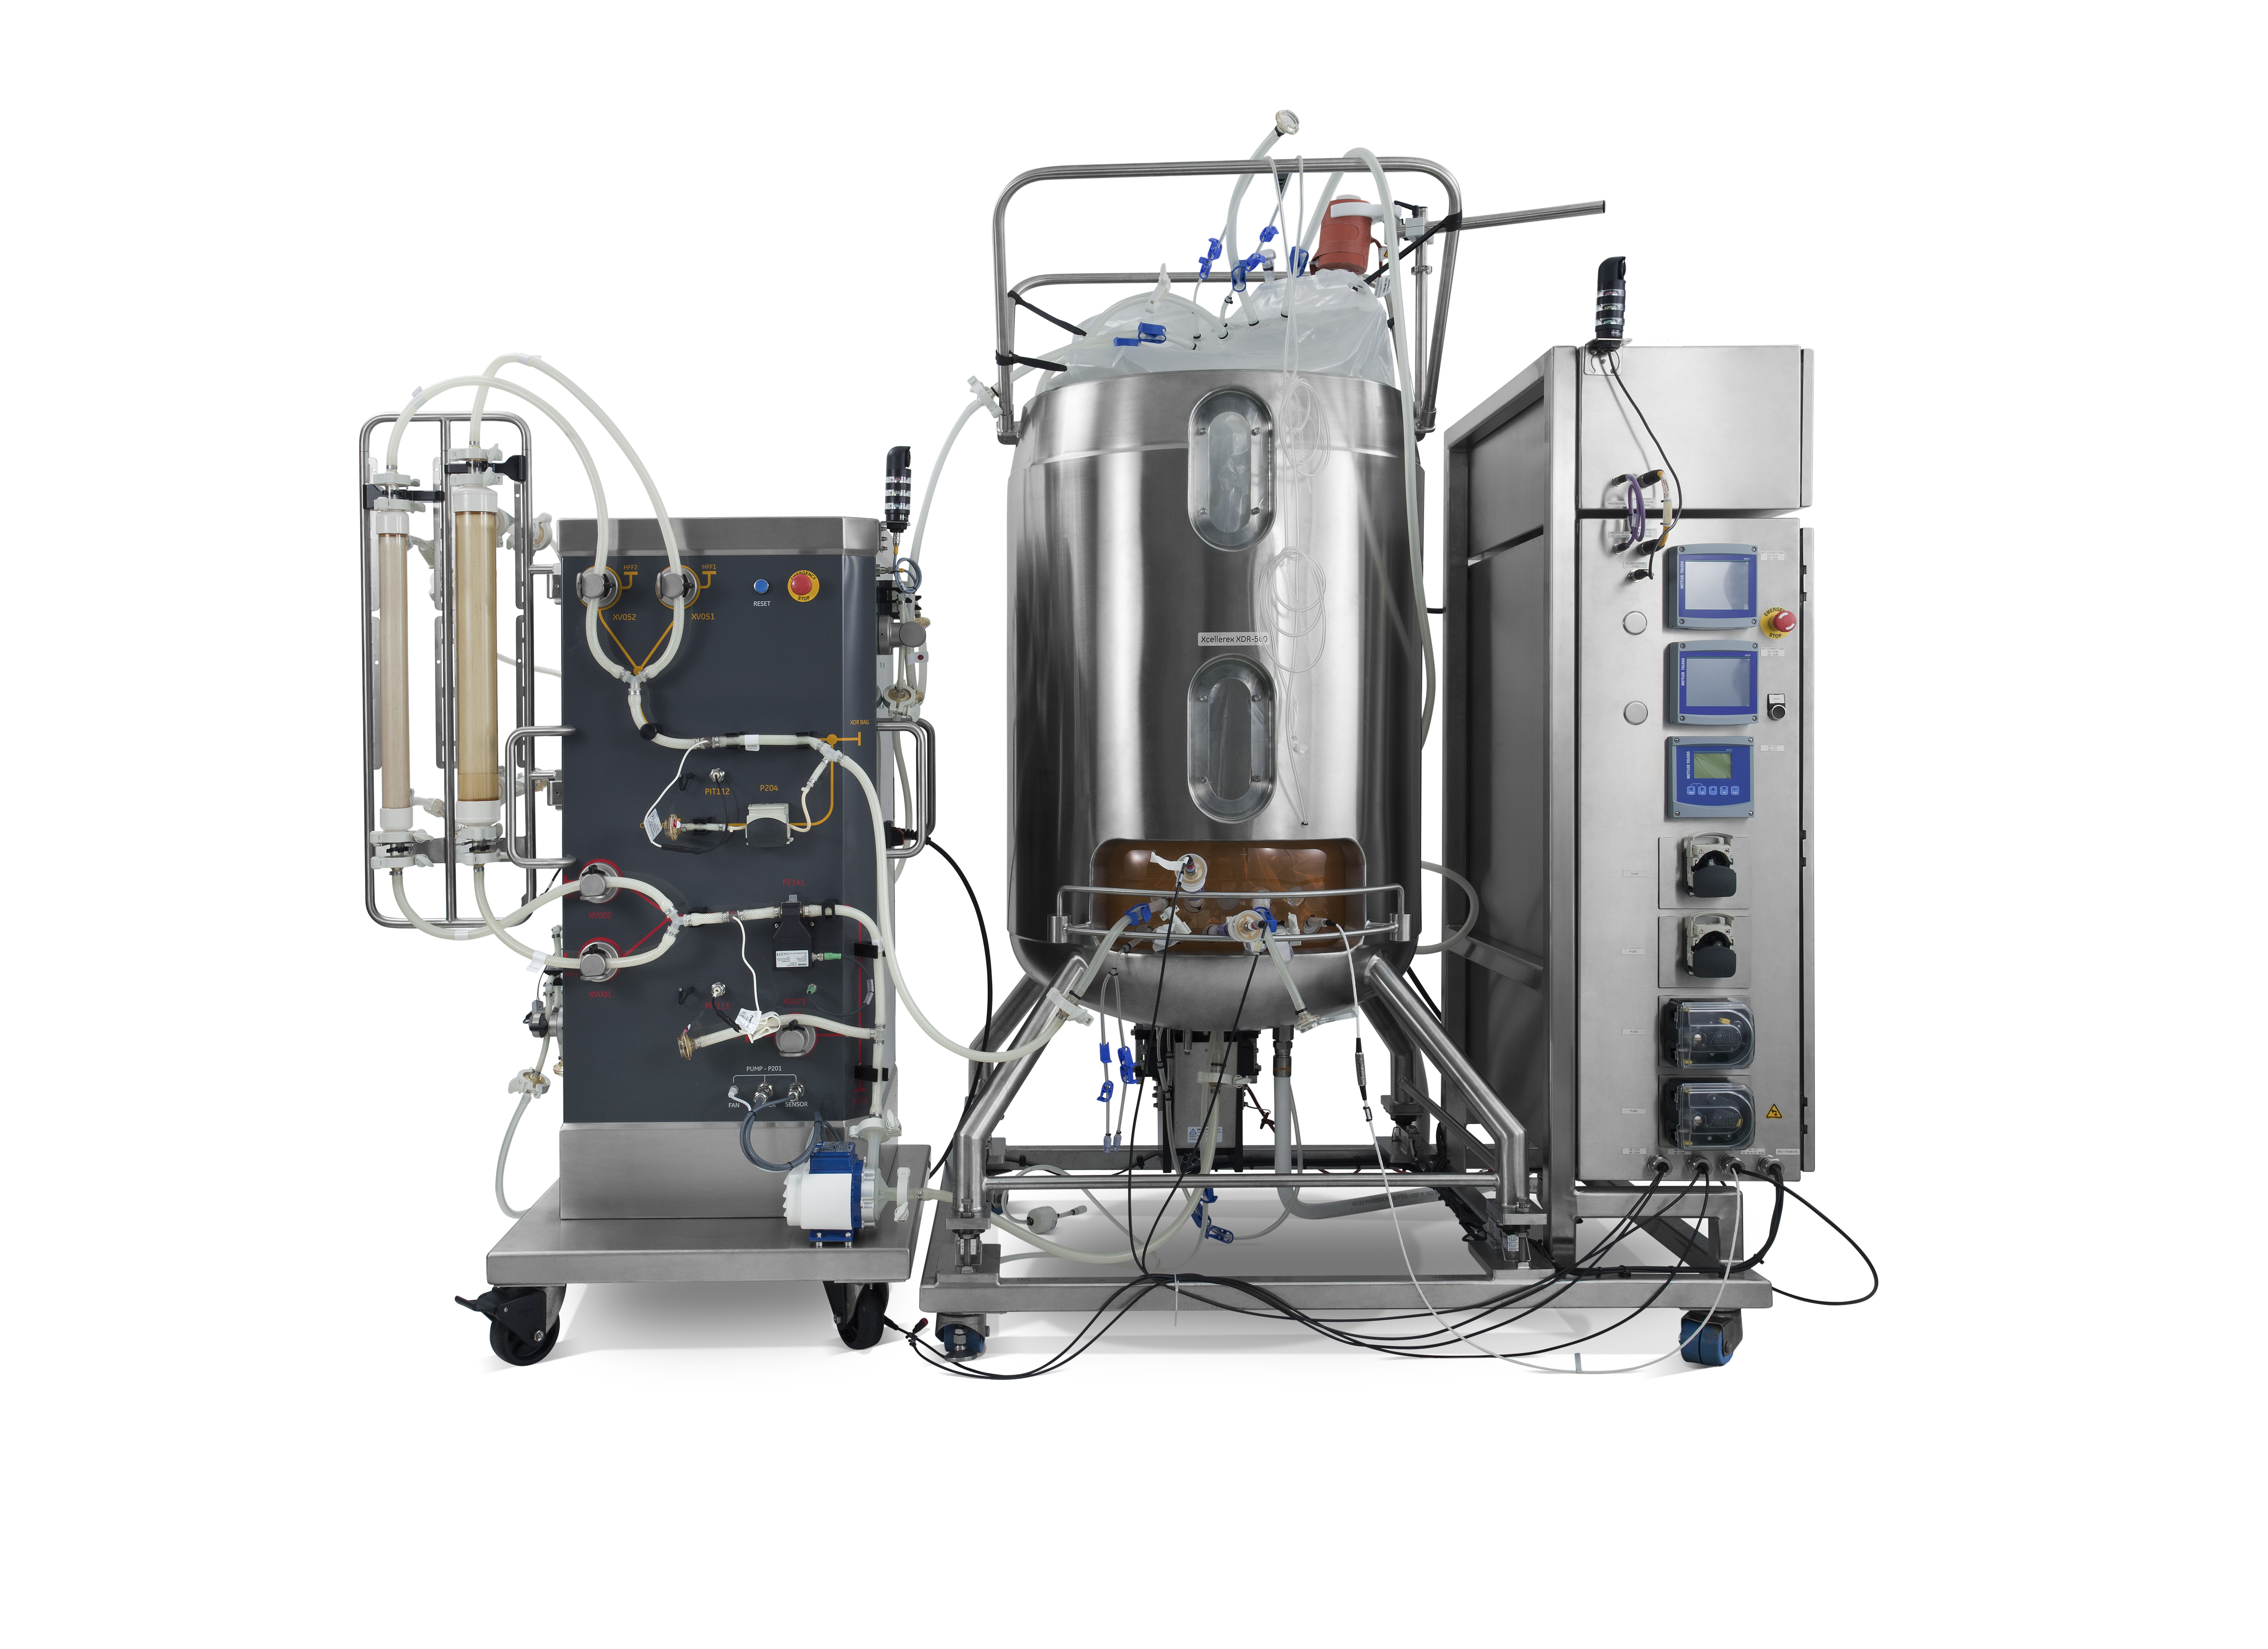 Xcellerex Automated Perfusion System with XDR 500 system